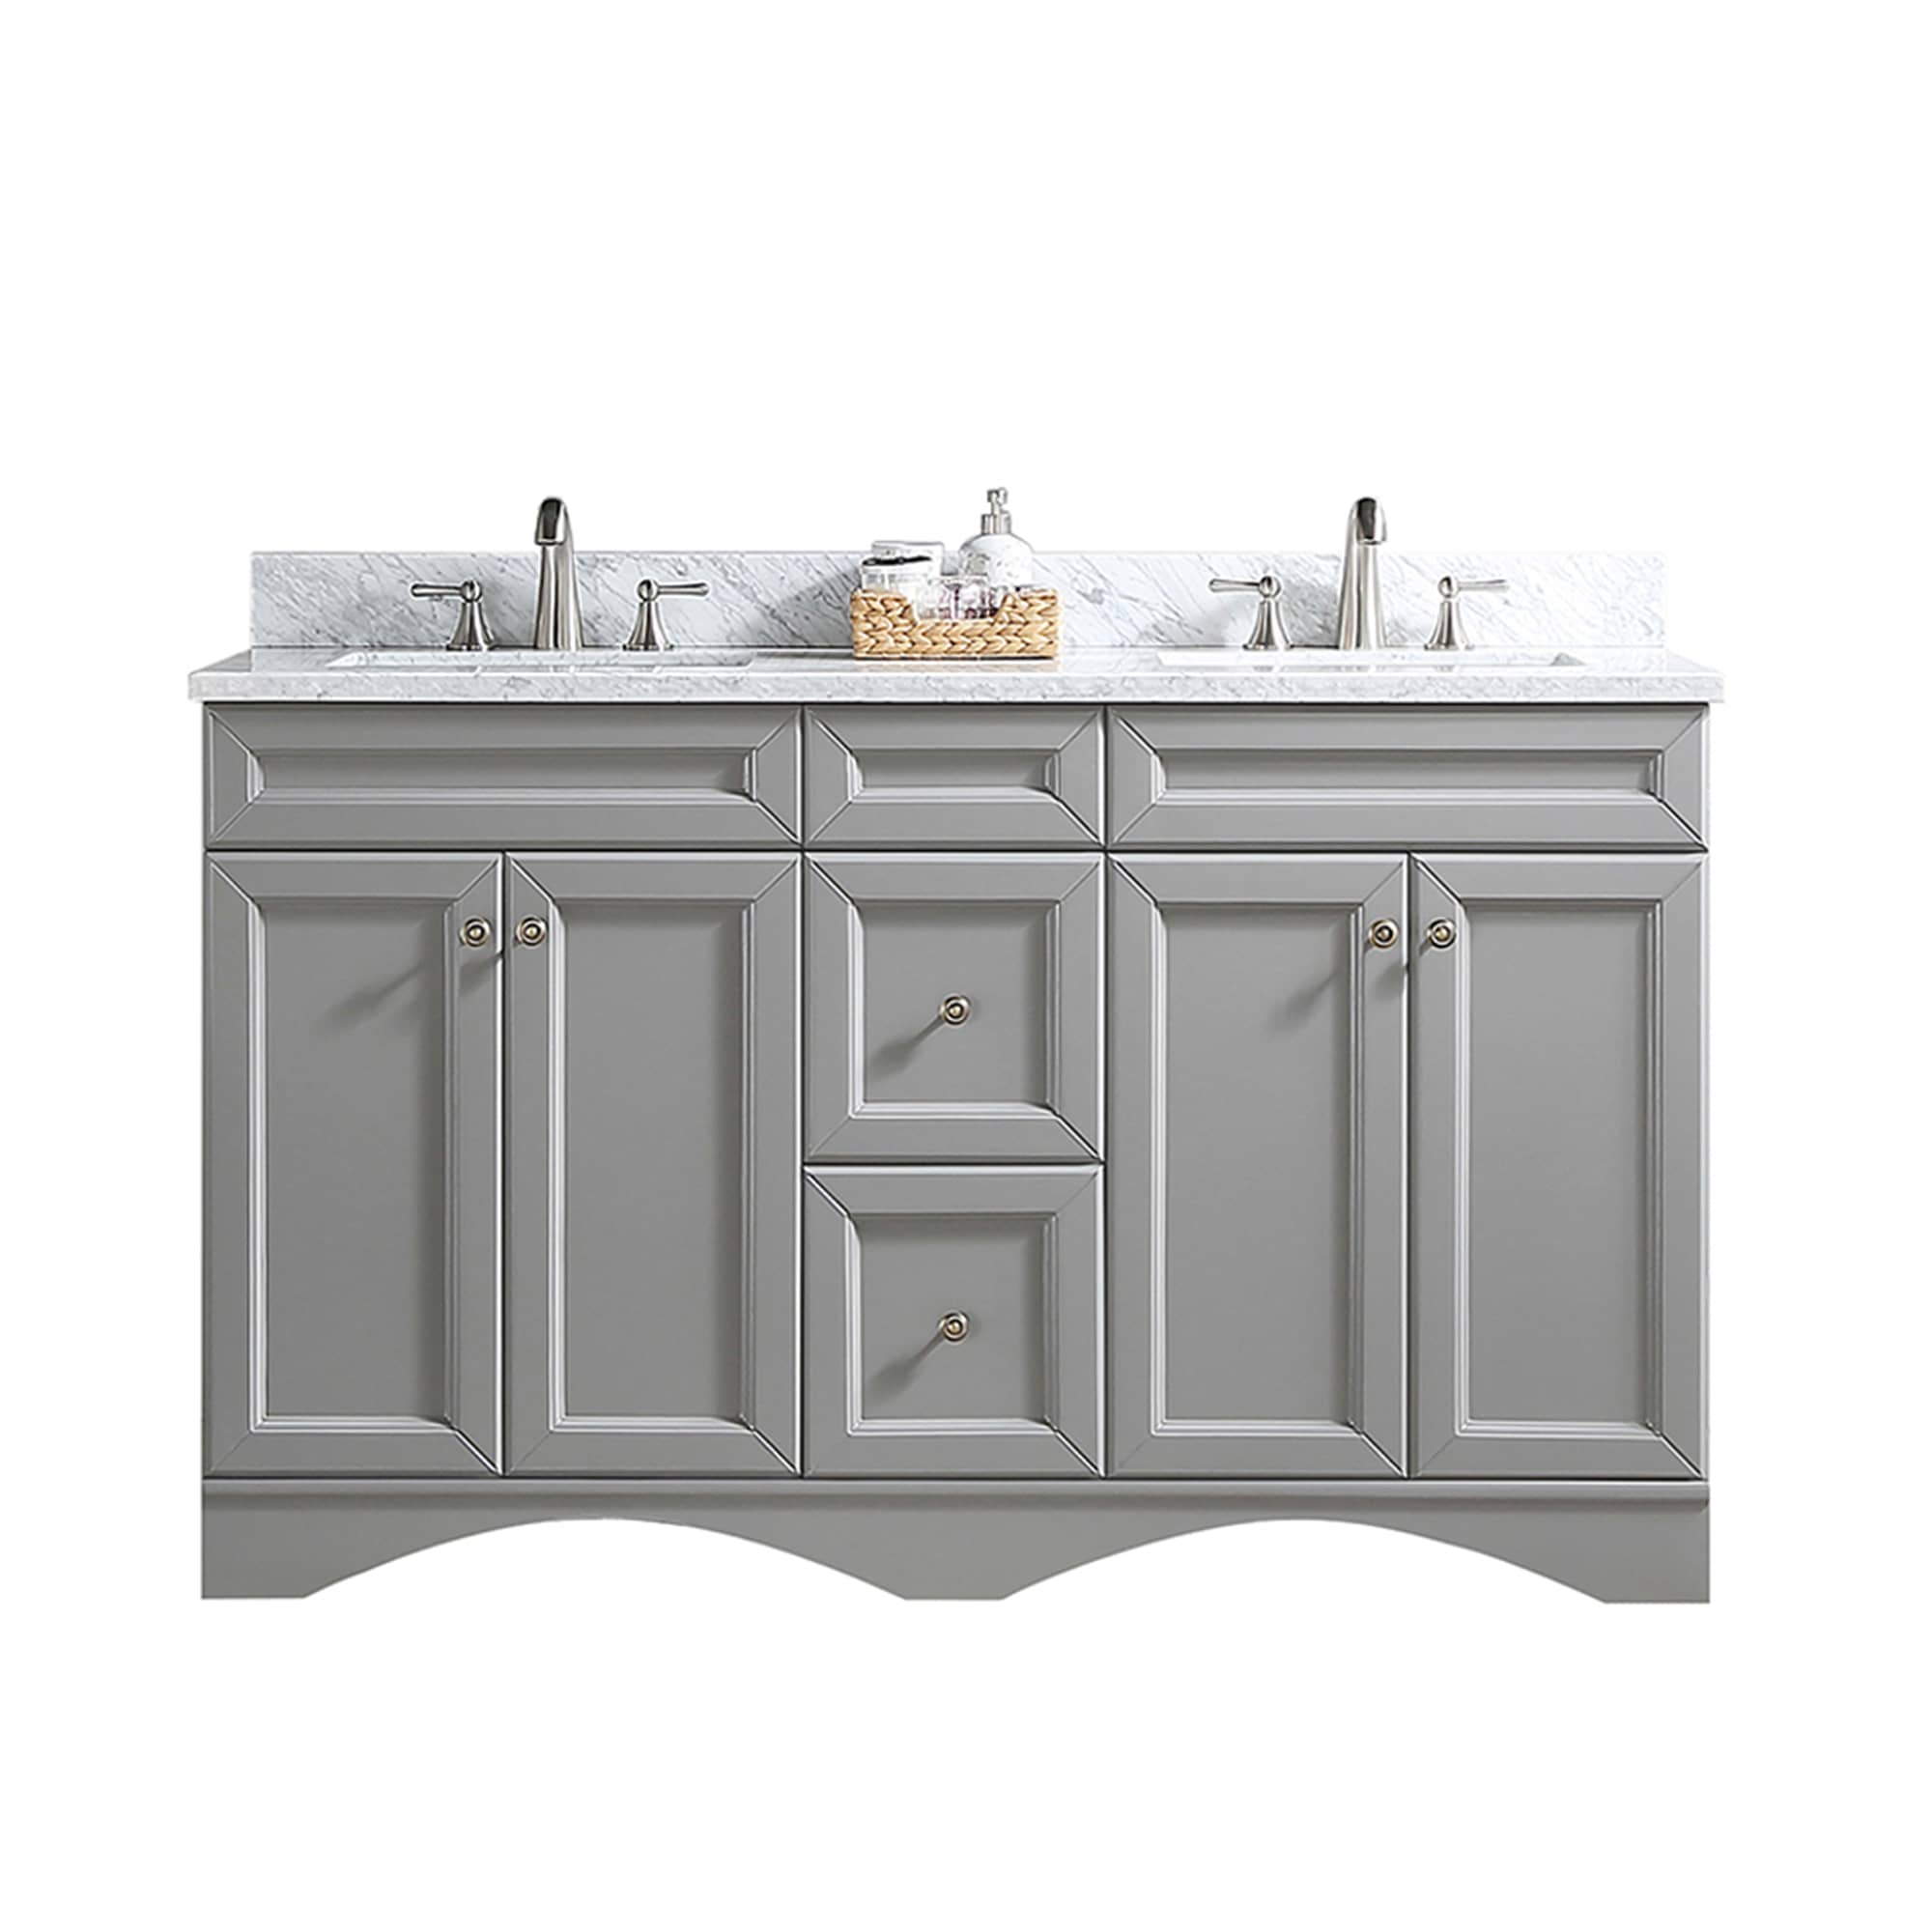 CASAINC 60 Inch Bath Vanity in Gray with White Top and Basin （60 W x 22D x 35.4“H ）